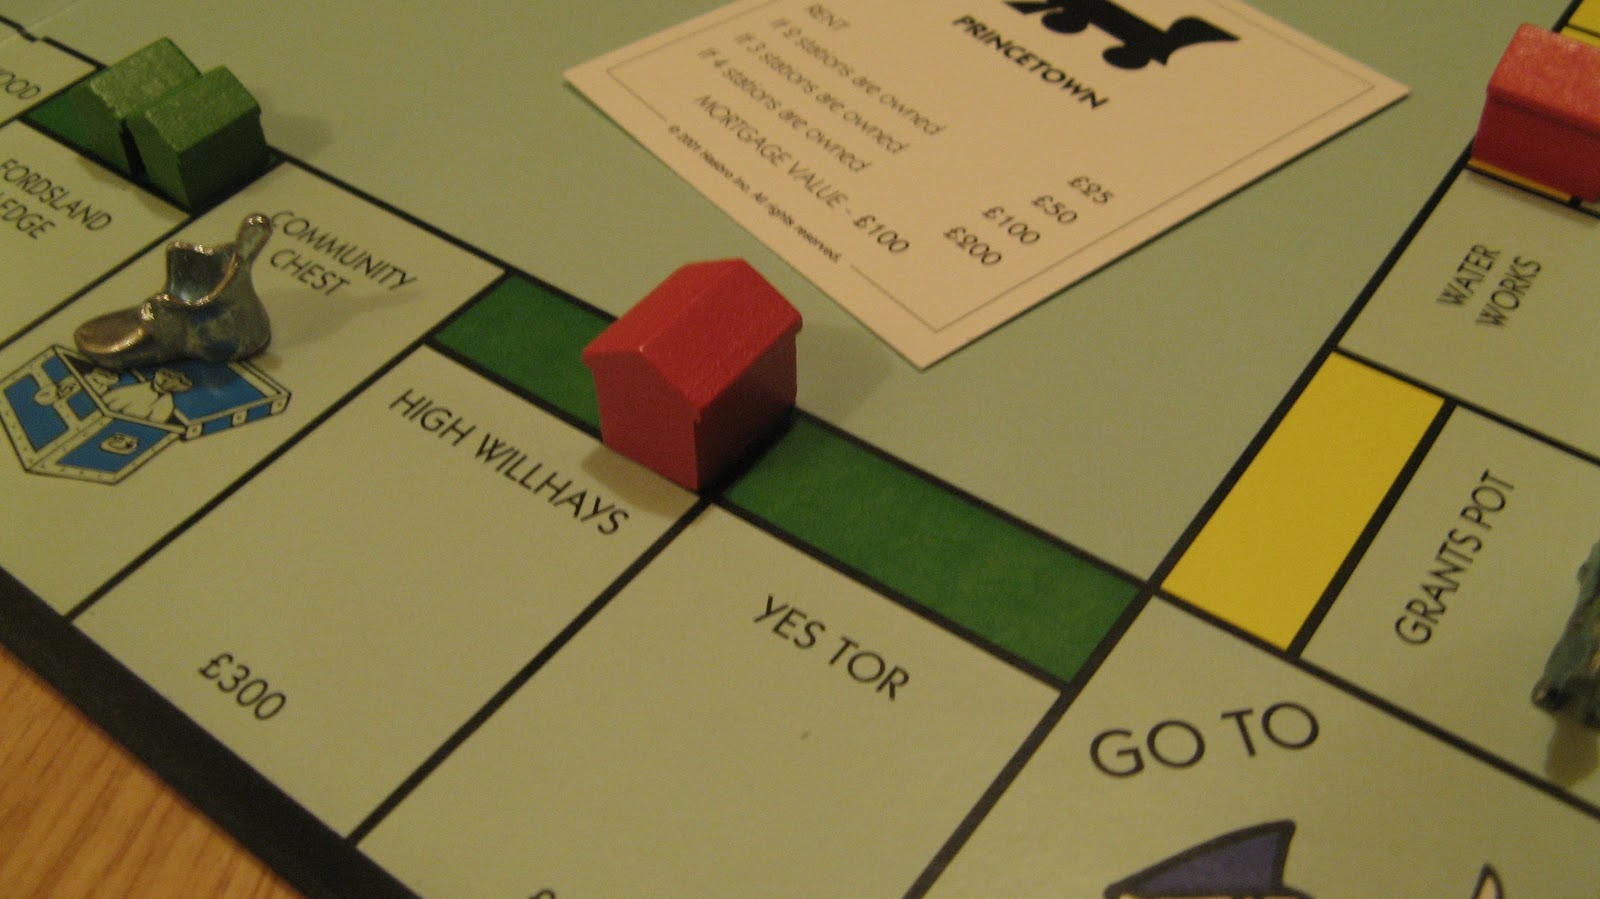 What are the railway stations on a monopoly board?